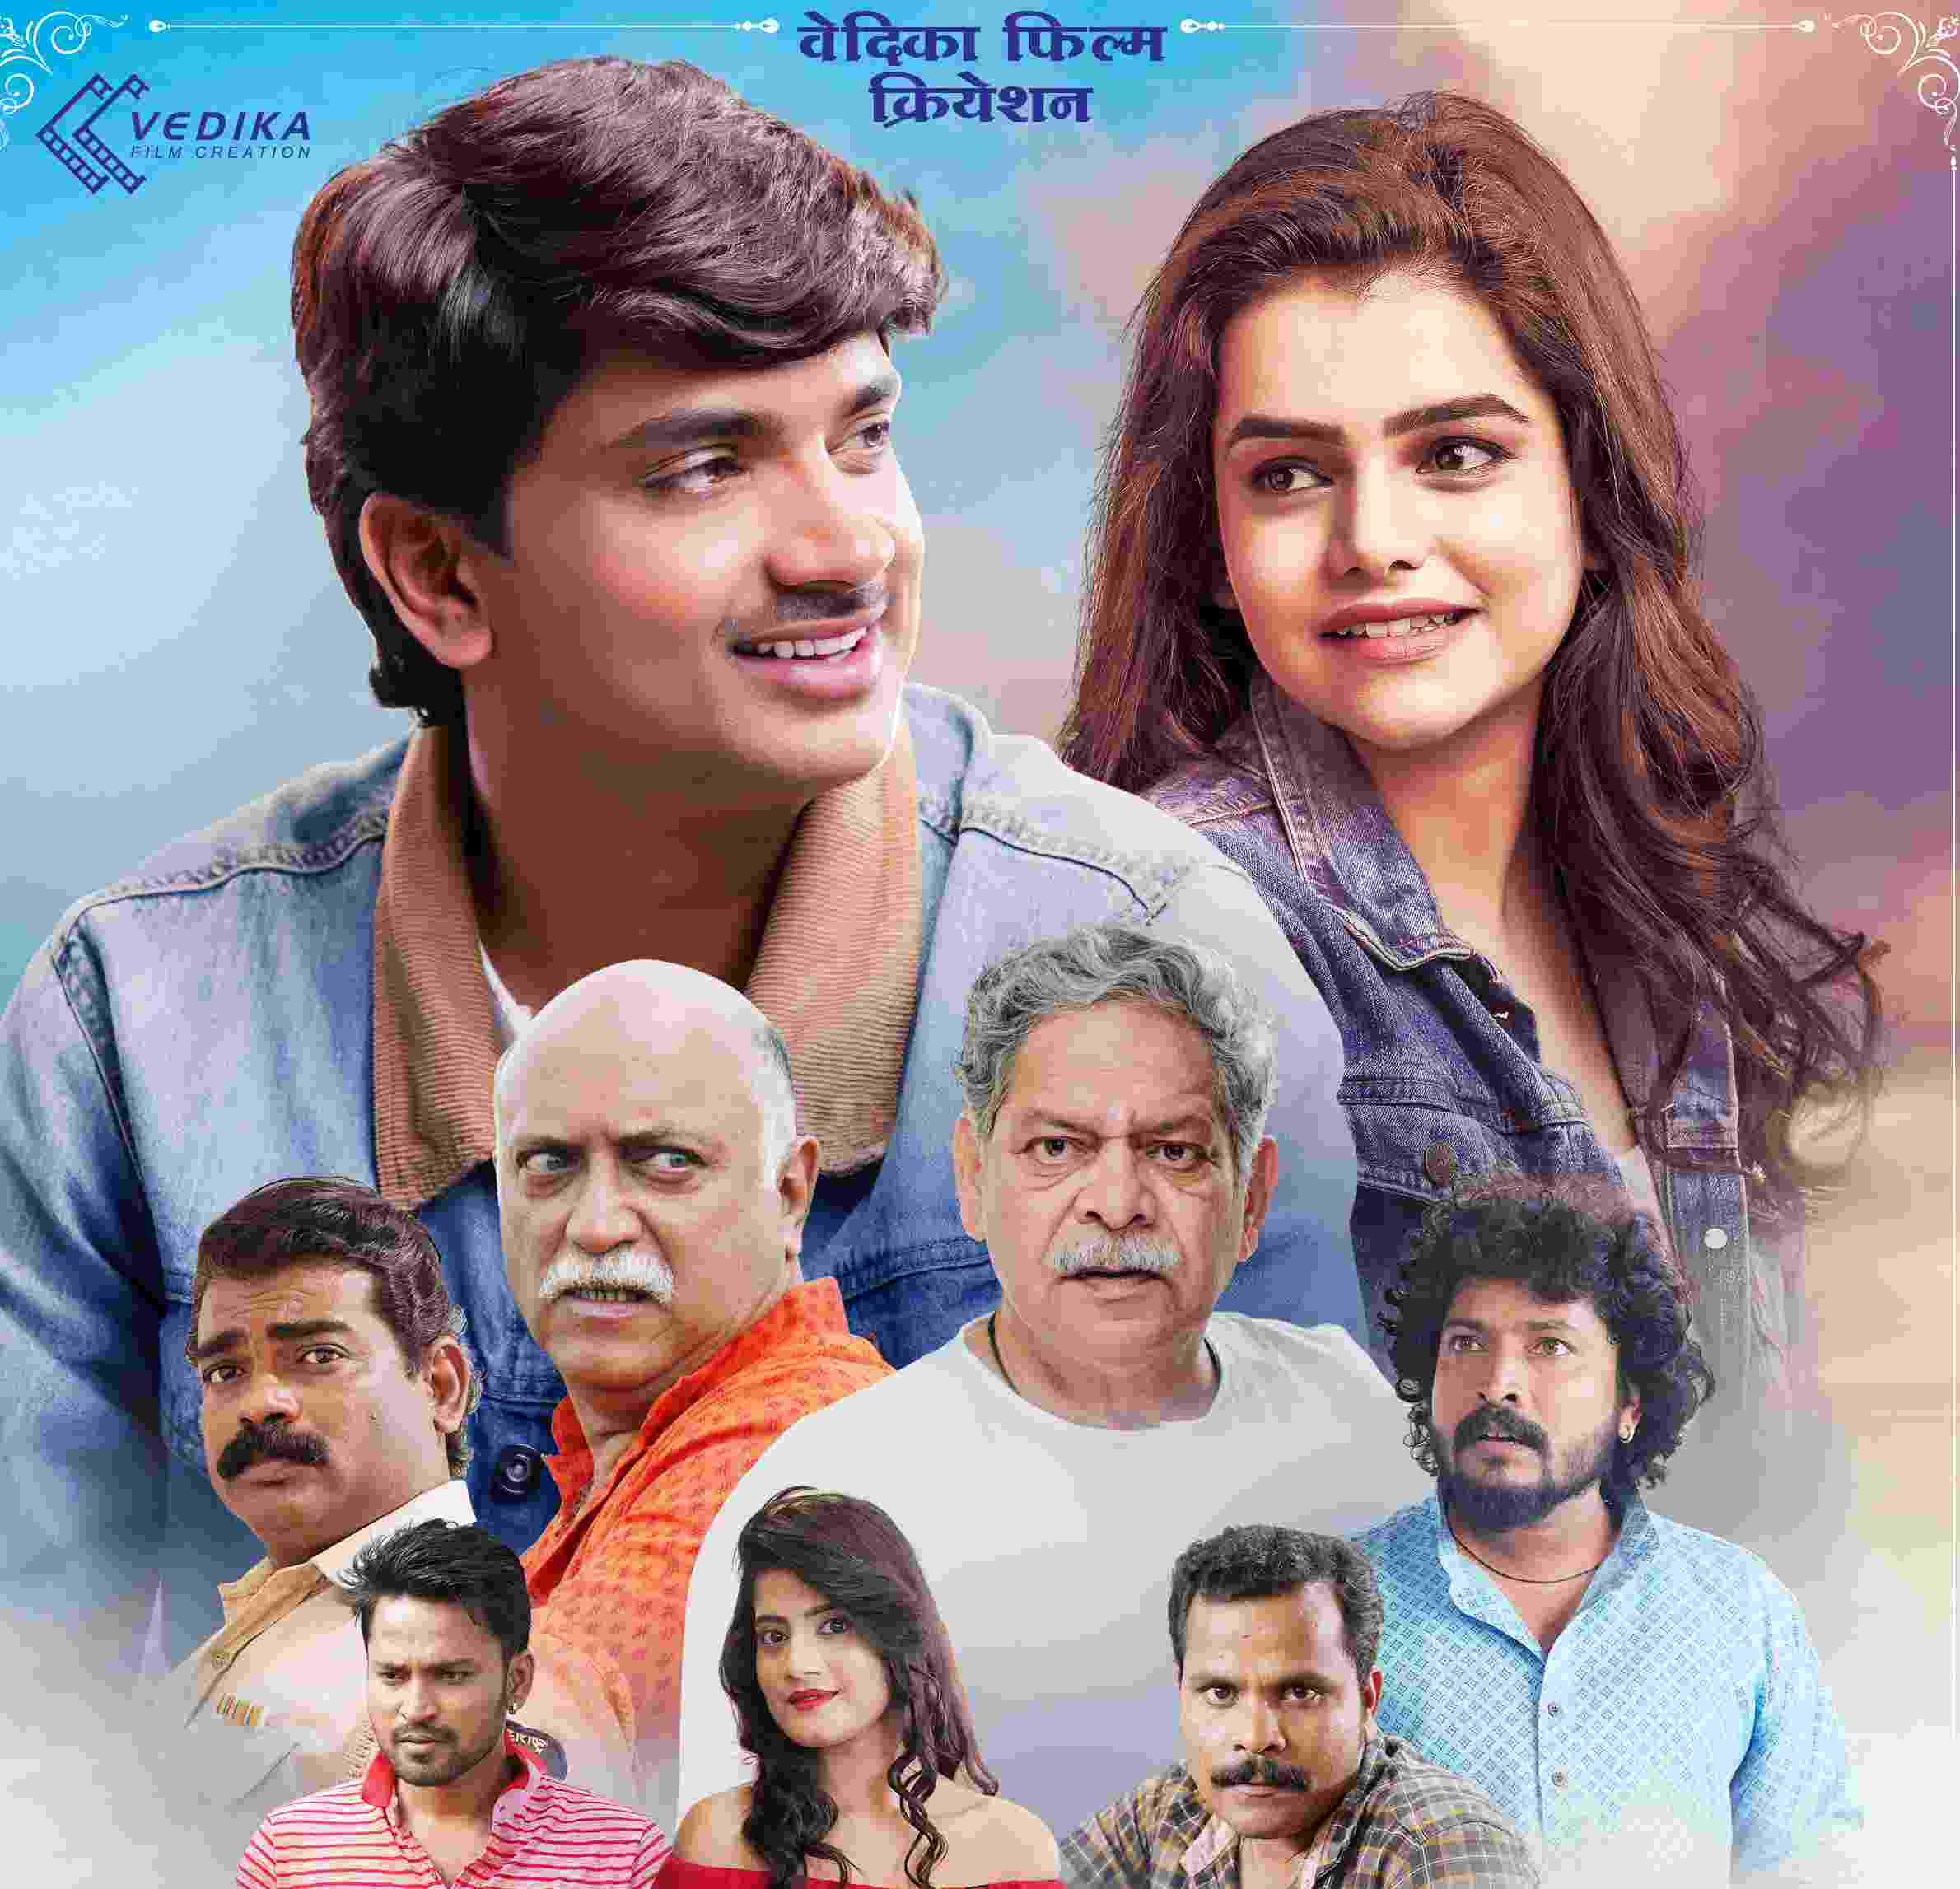 Trailer of Marathi Movie 'Law of Love' released